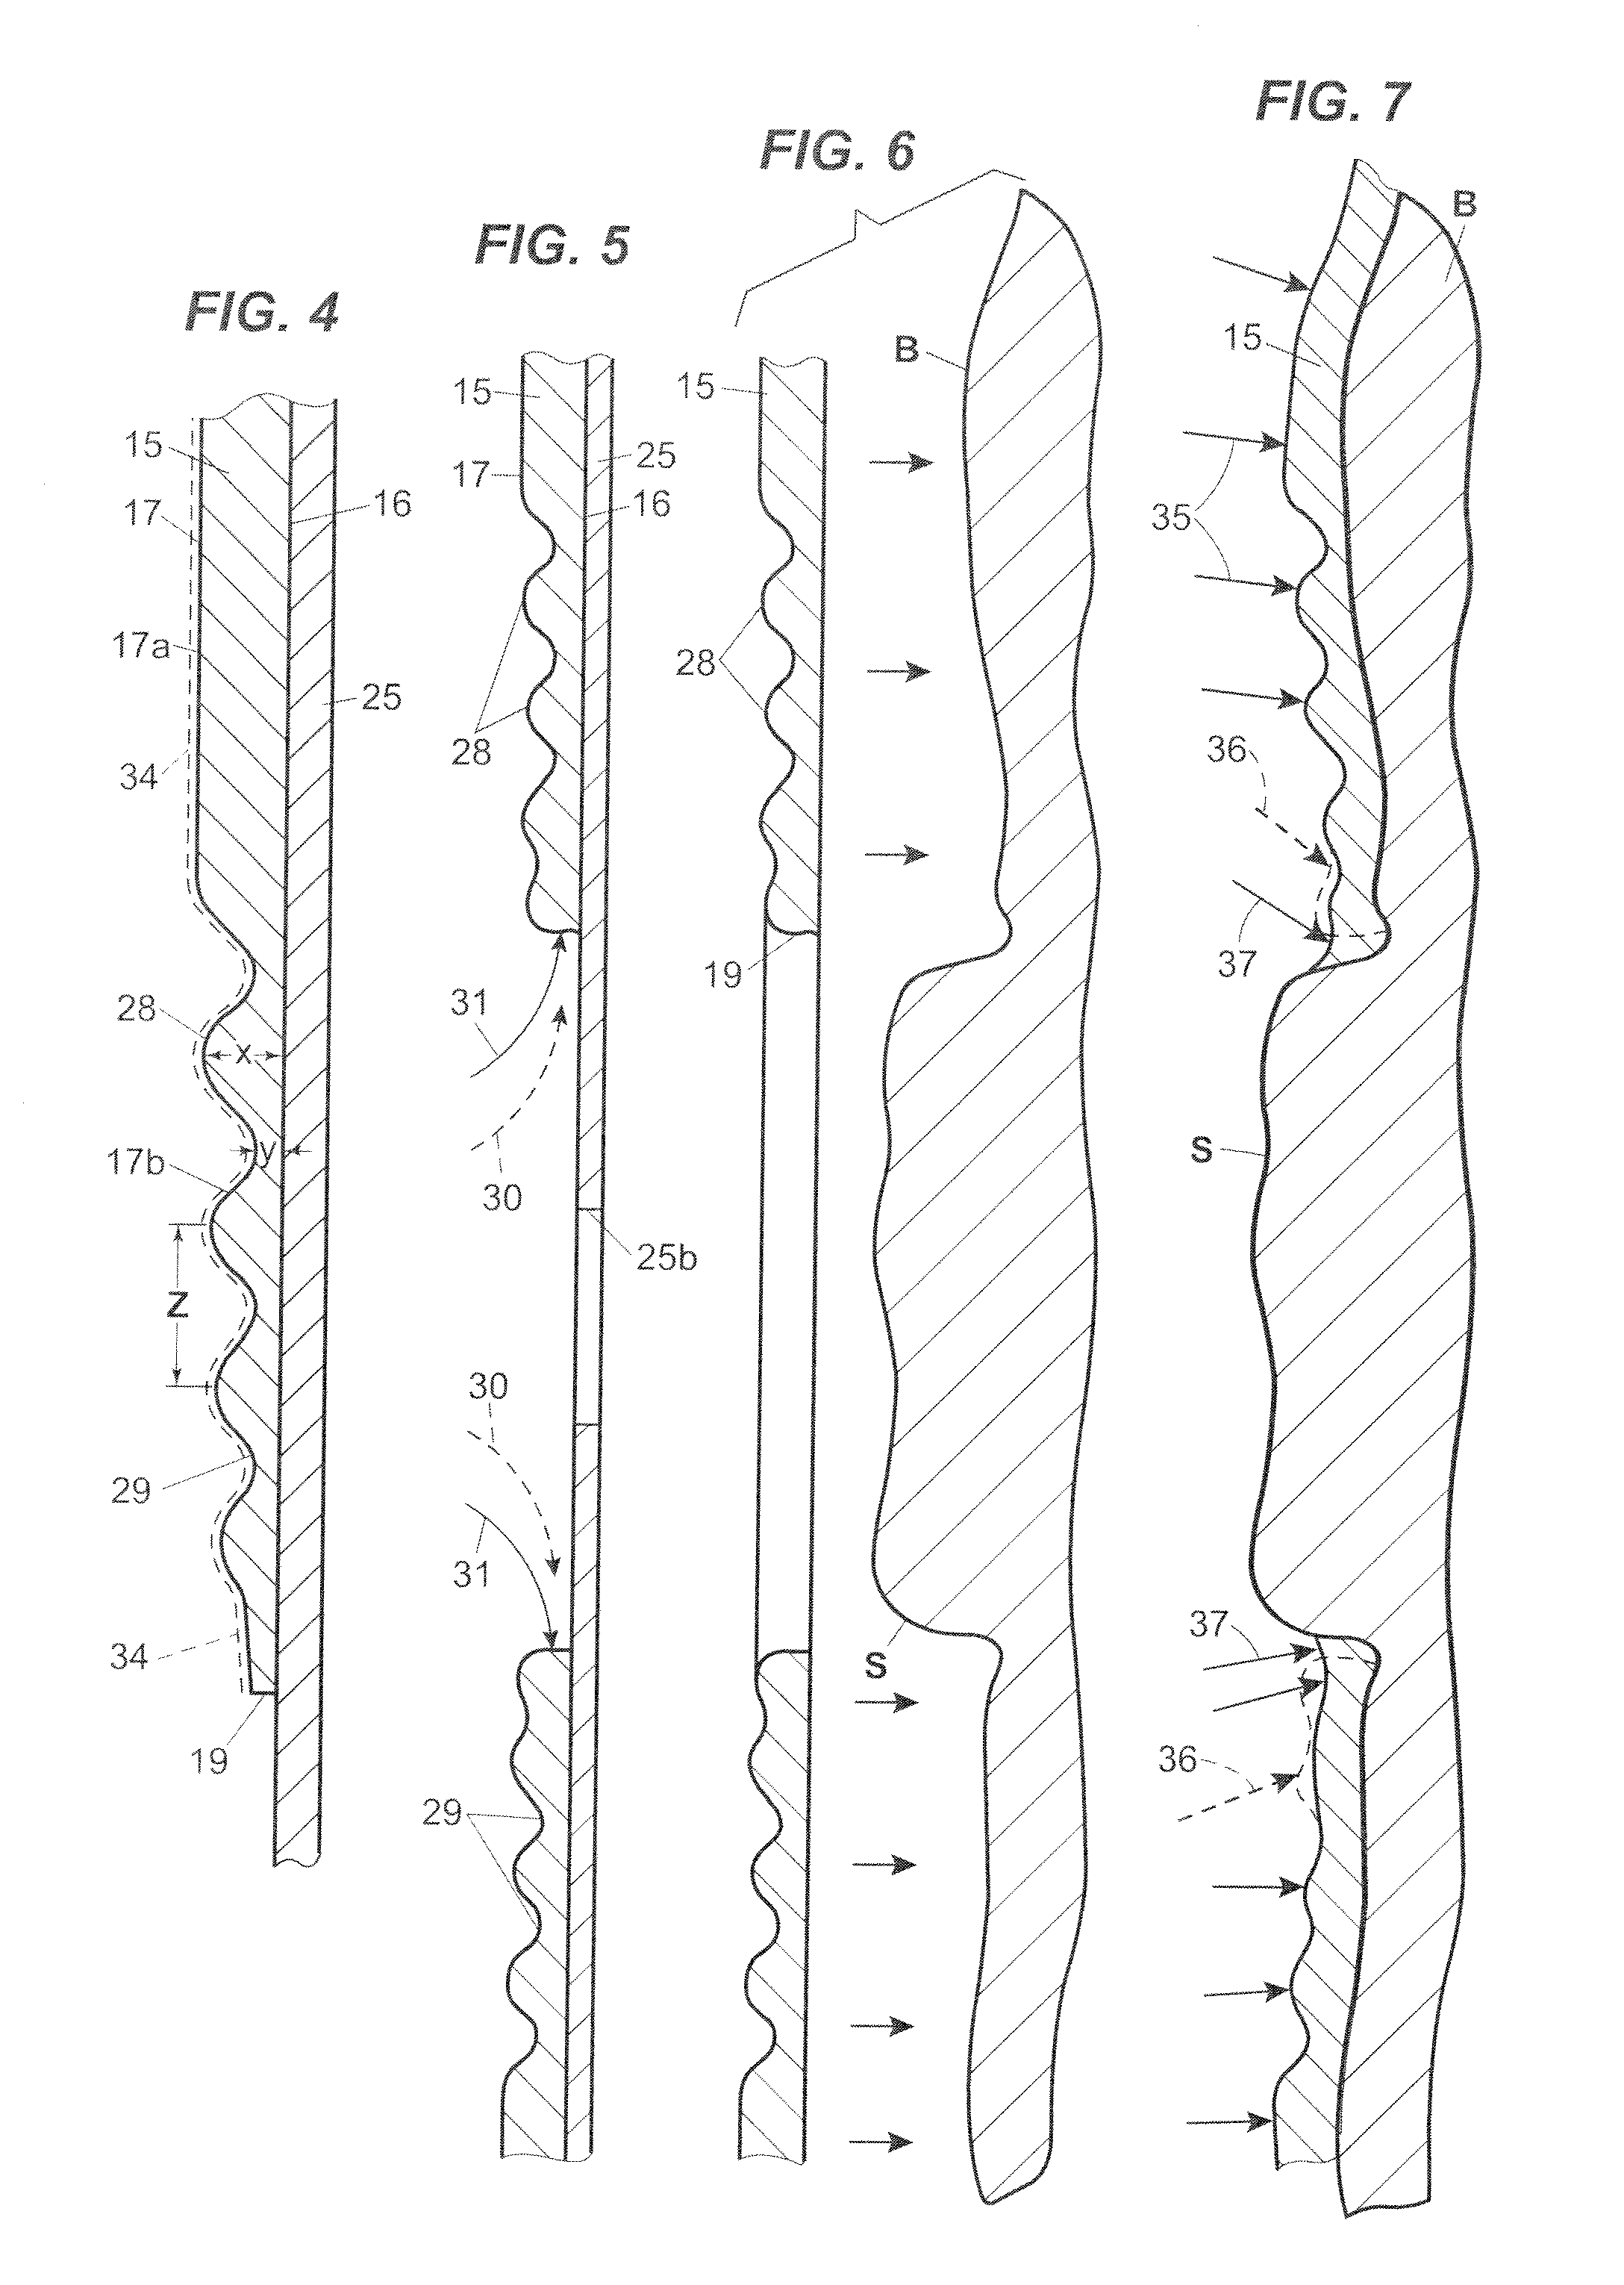 Ostomy faceplate having moldable adhesive wafer with diminishing surface undulations